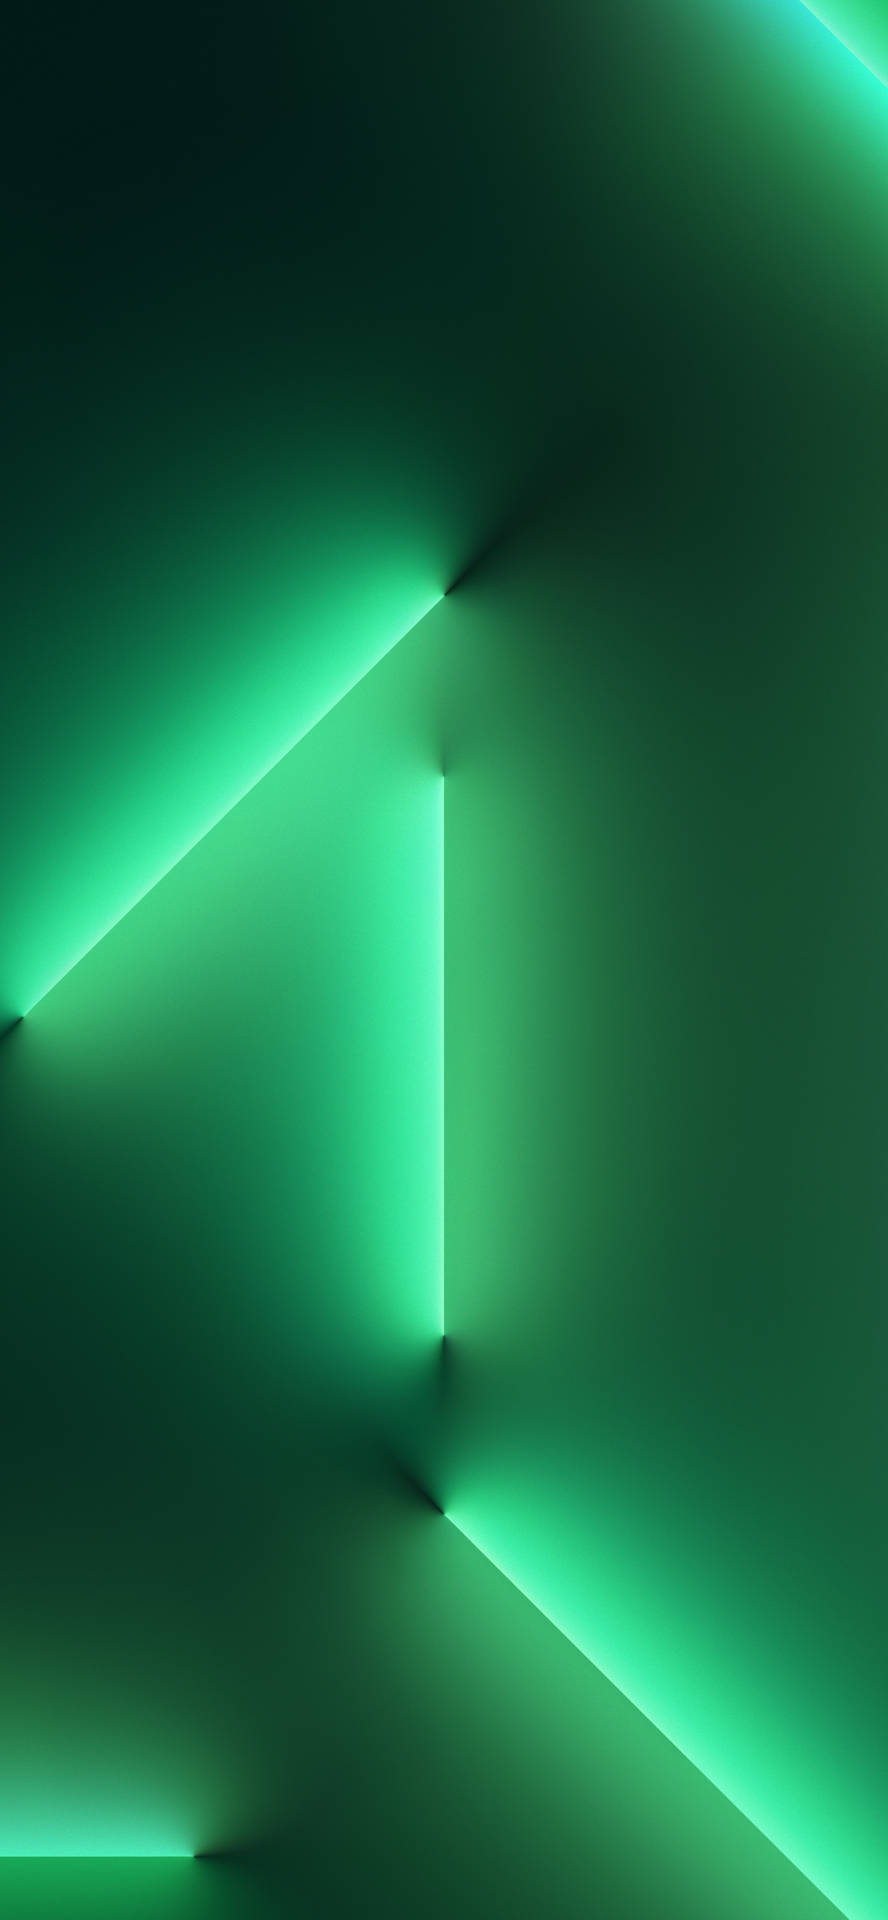 Neon Lights On A Wall Green Iphone Background